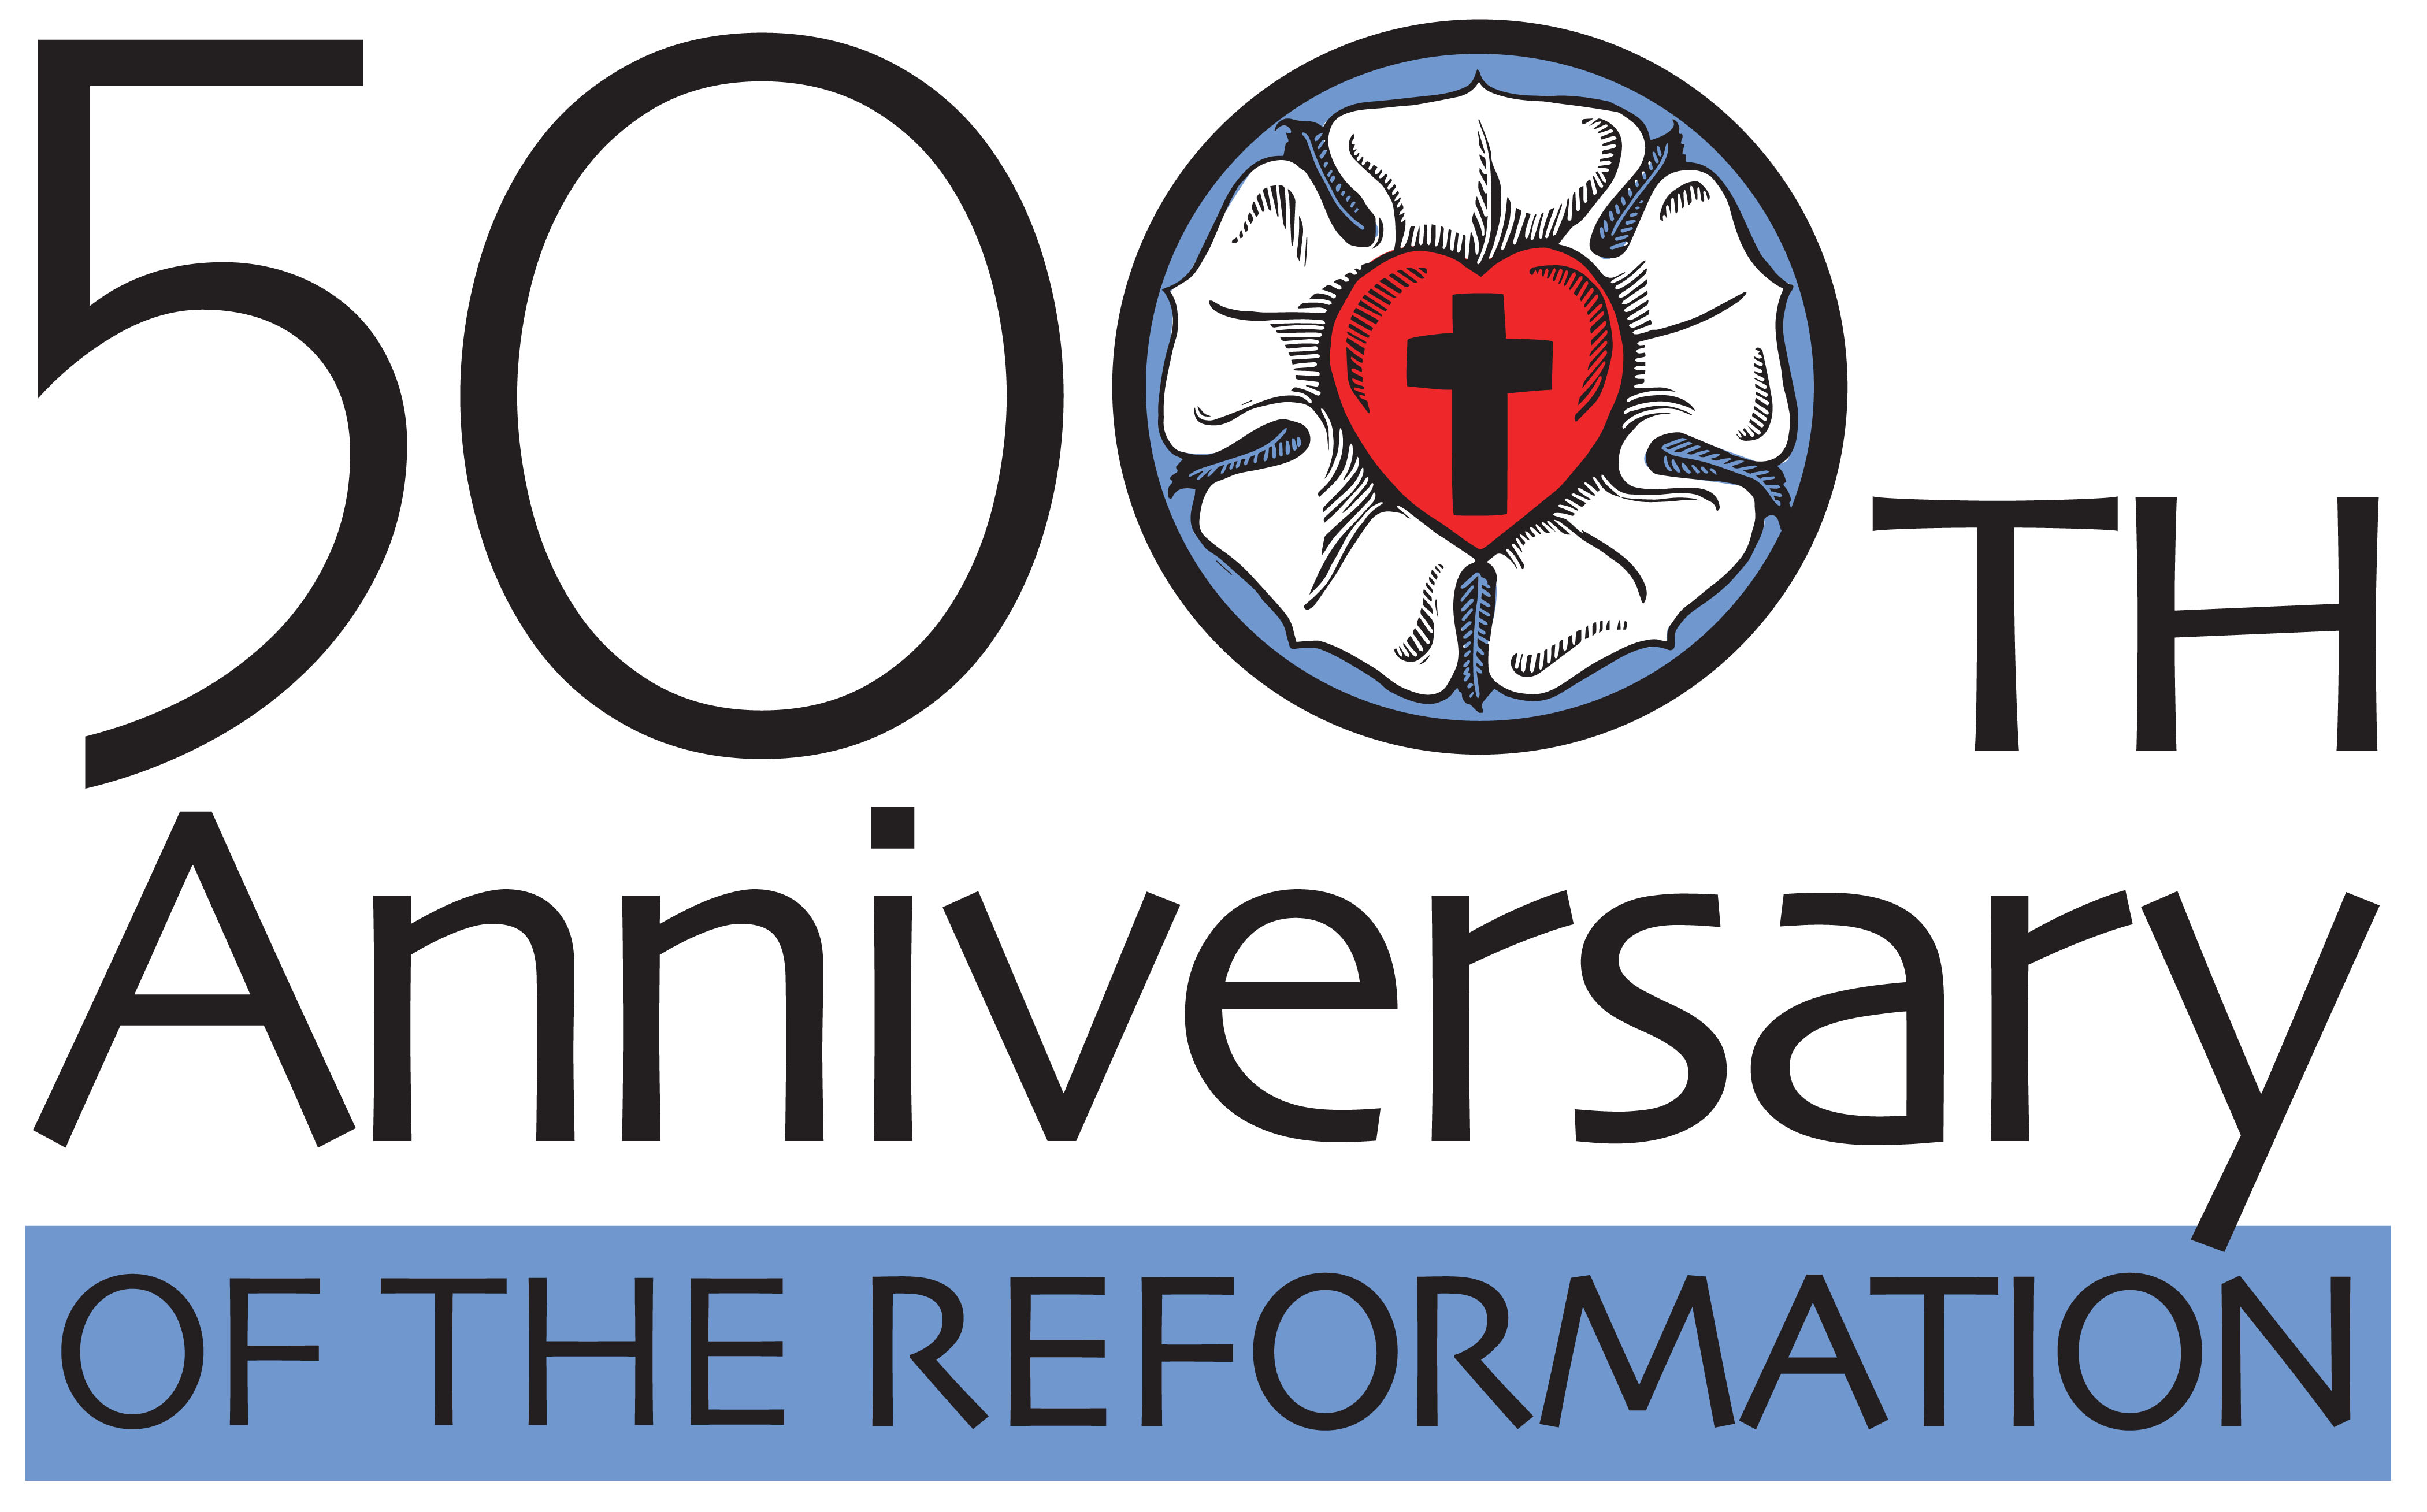 Reformation Clipart | Free download on ClipArtMag